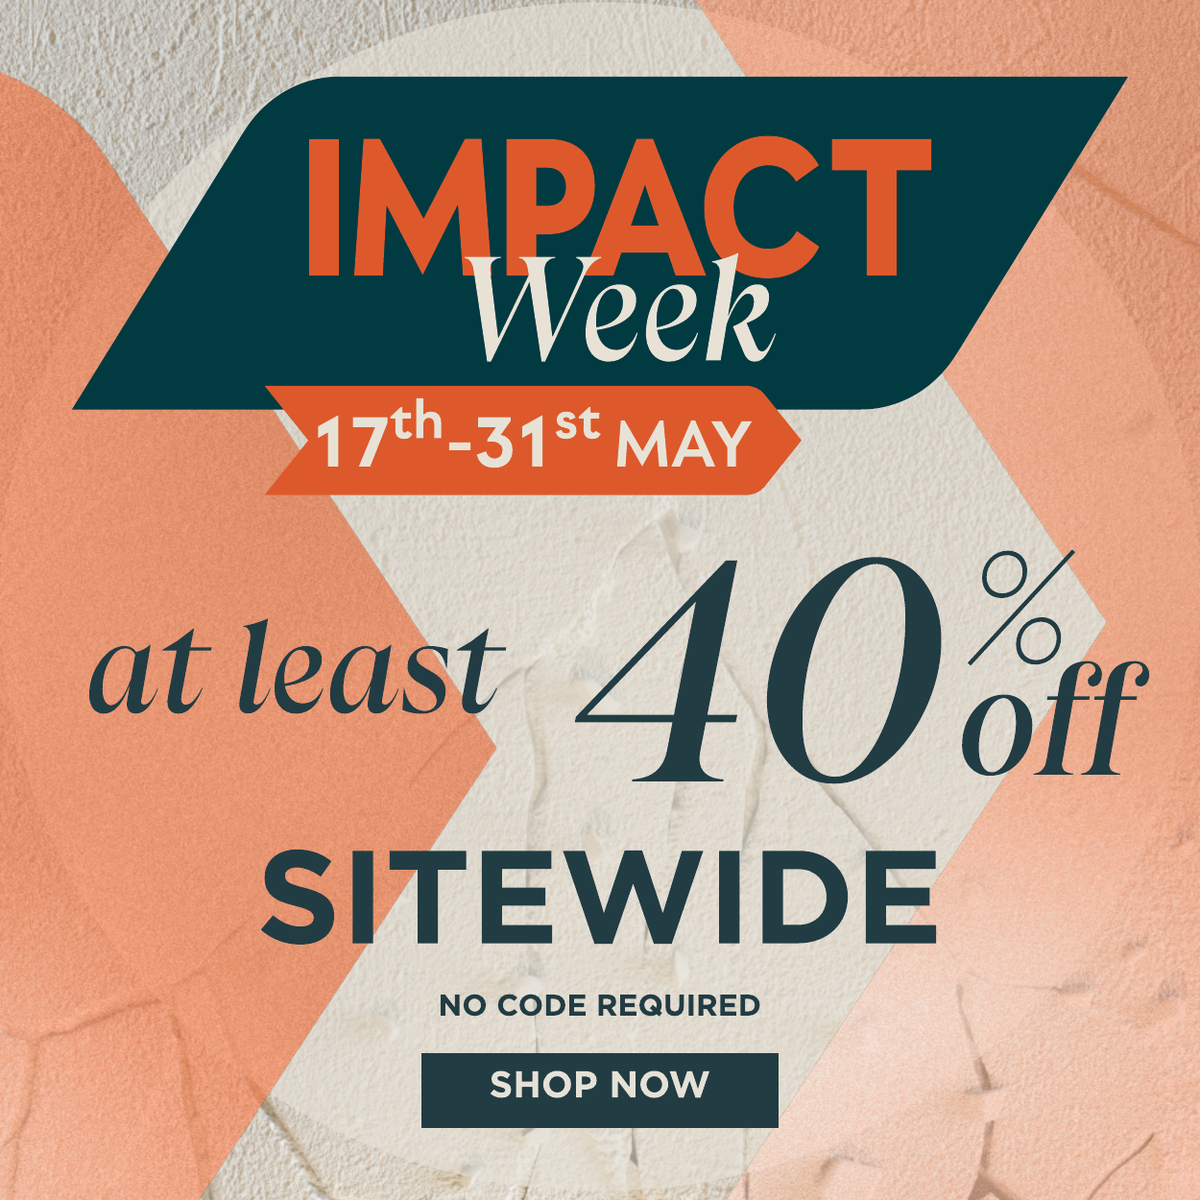 Impact week sale on now at least 40% off everything shop now